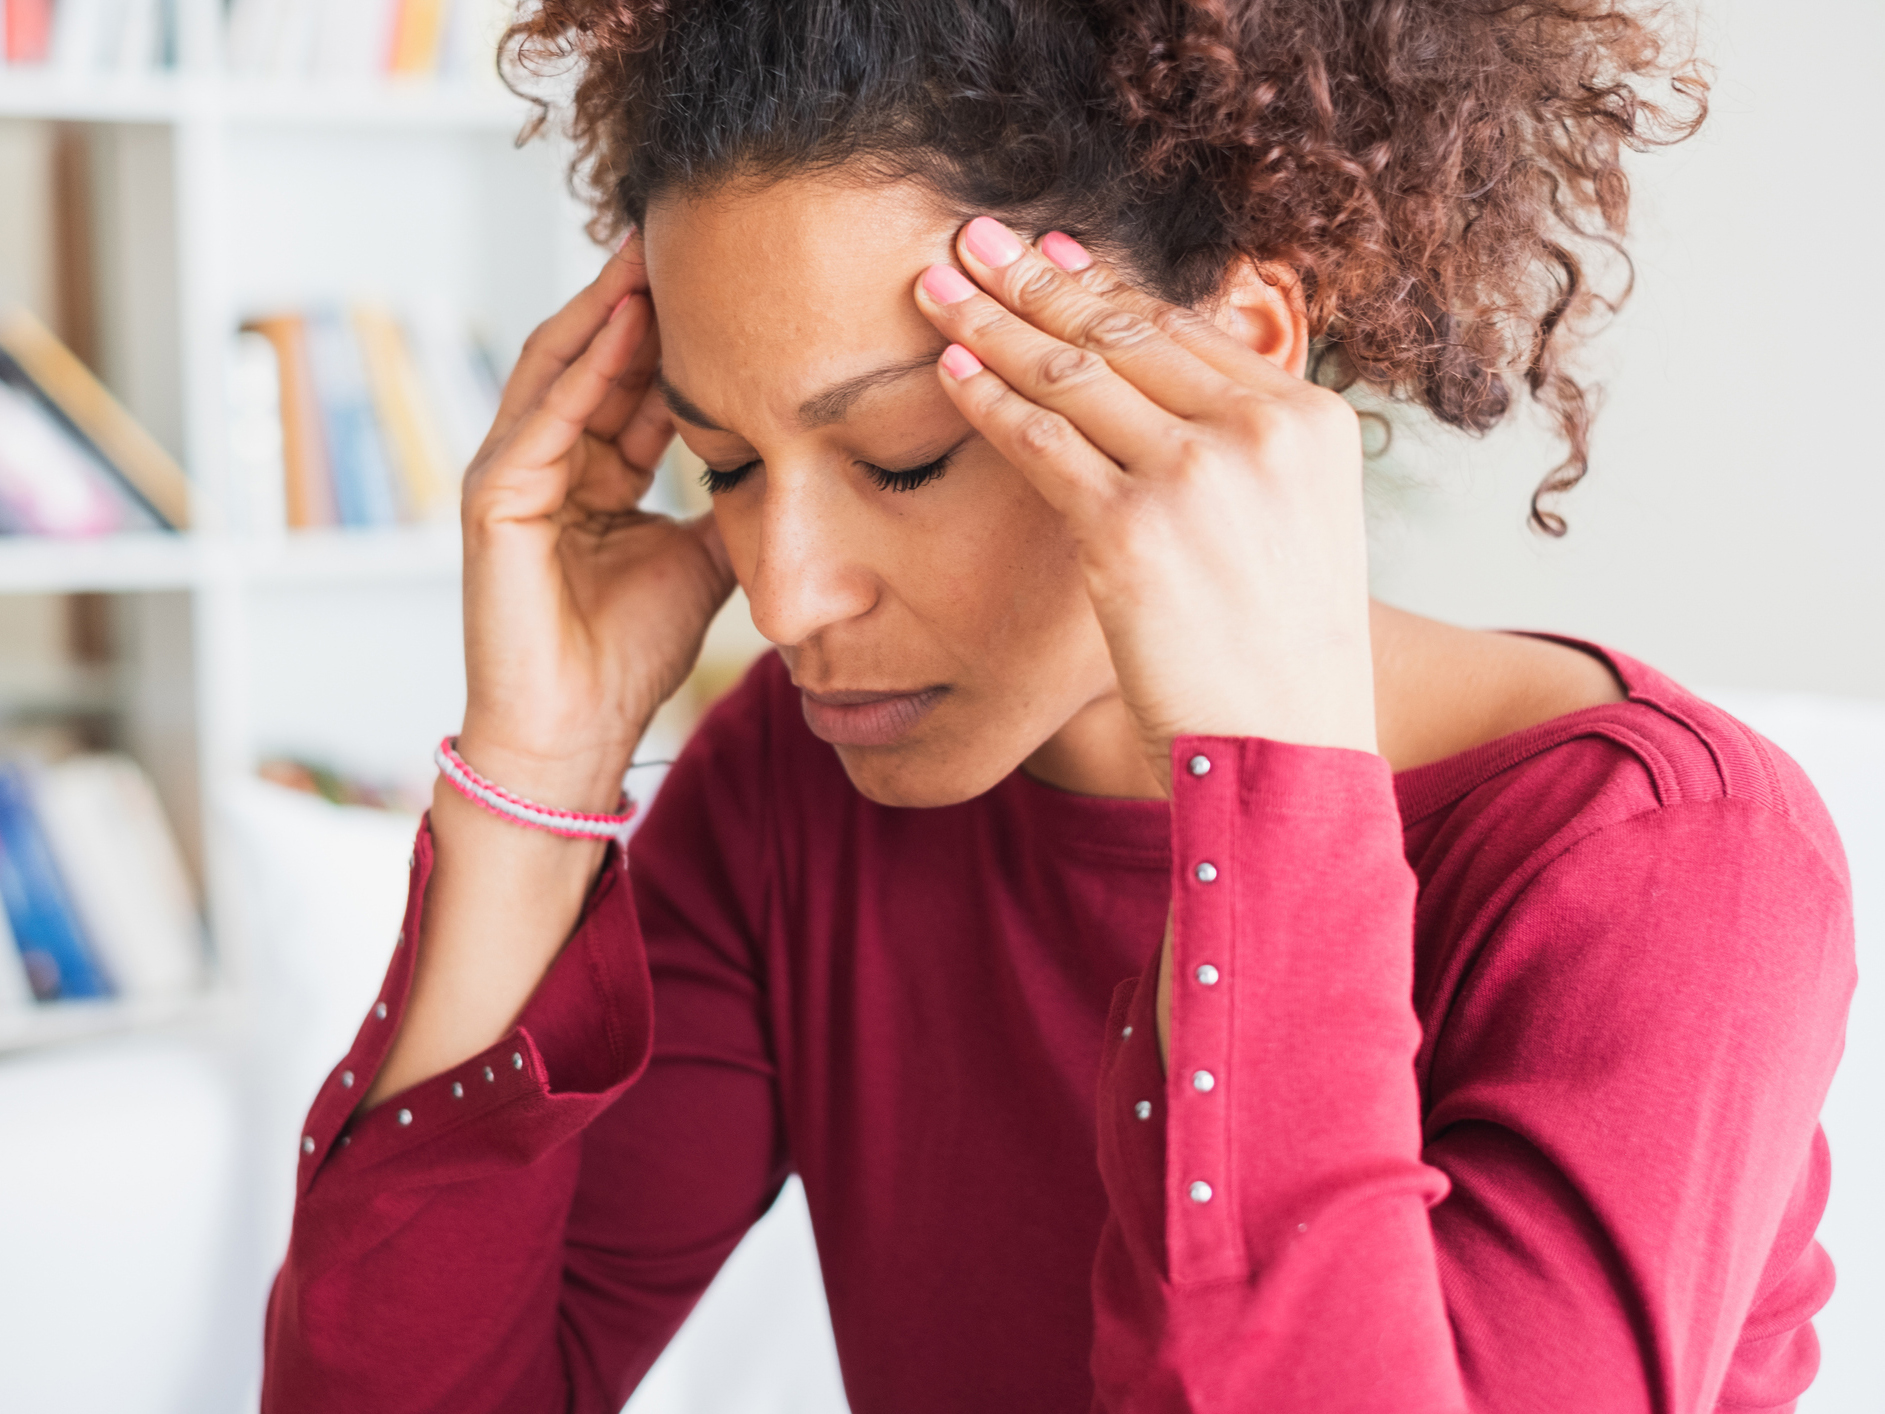 The best thing about having migraines is you won’t get this disease